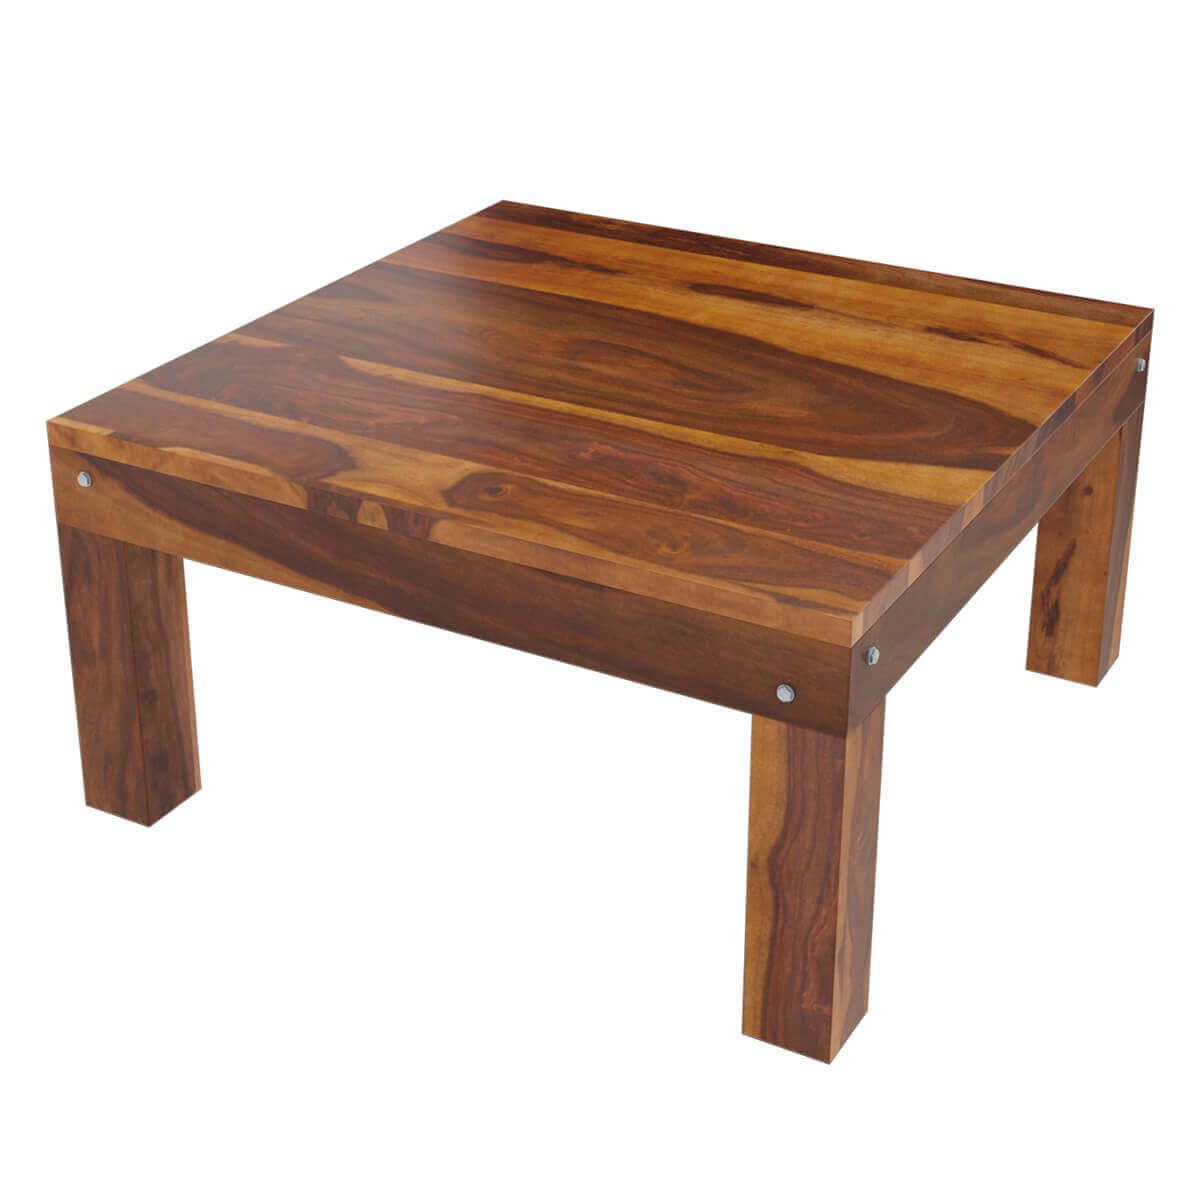 Patet Contemporary Rustic Solid Wood Cocktail Square Coffee Table Intended For Rustic Espresso Wood Console Tables (View 11 of 20)